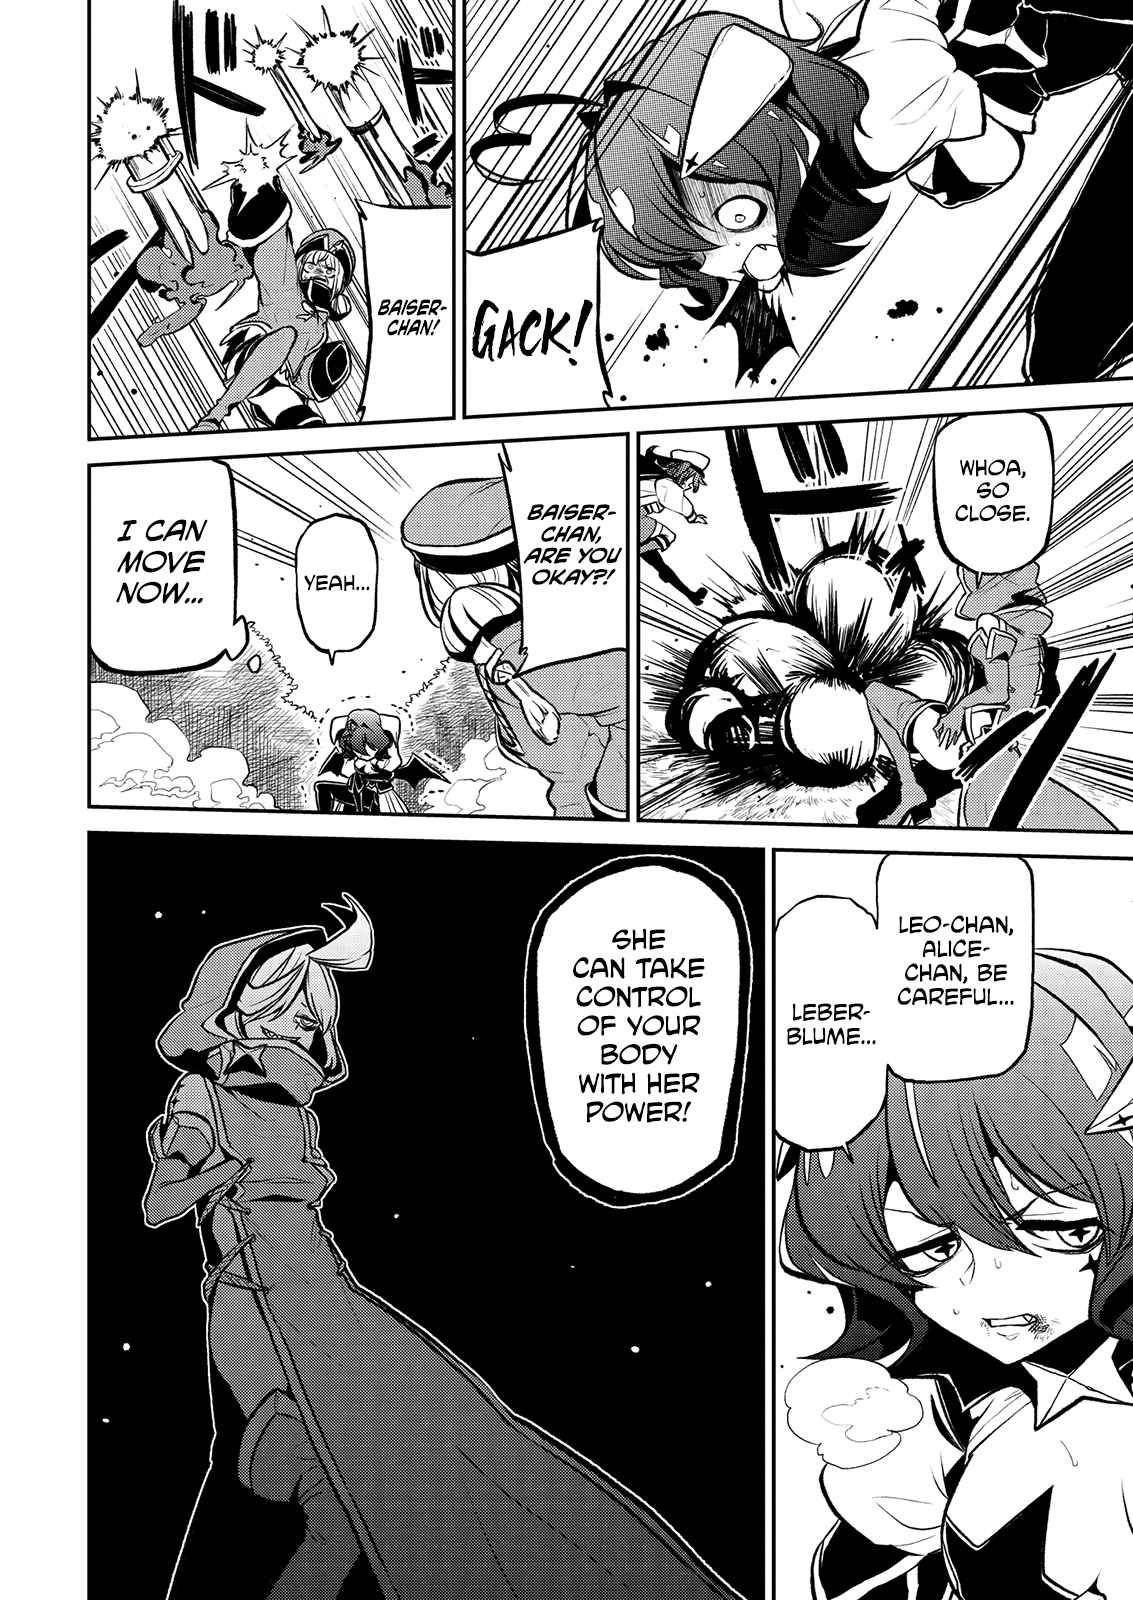 Looking up to Magical Girls Vol. 3 Ch. 14